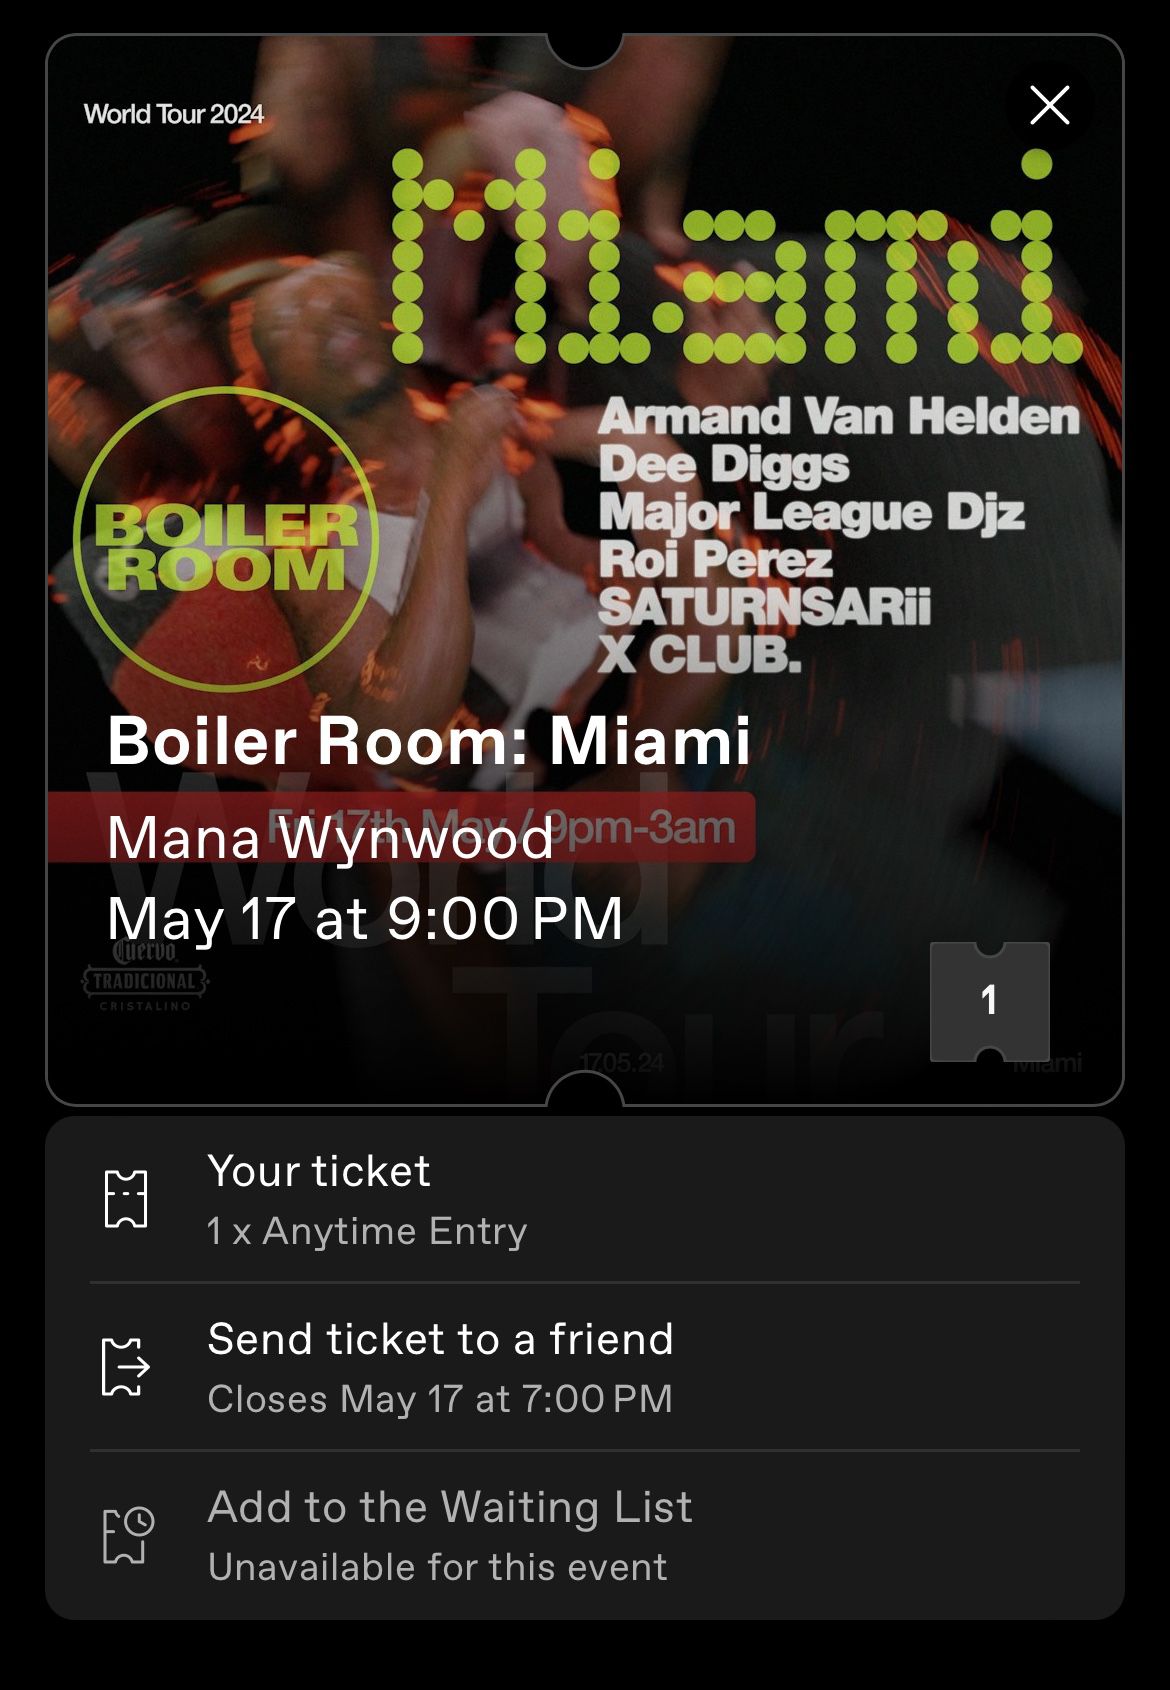 Boiler Room Miami (1) Anytime Entry Ticket May 17th